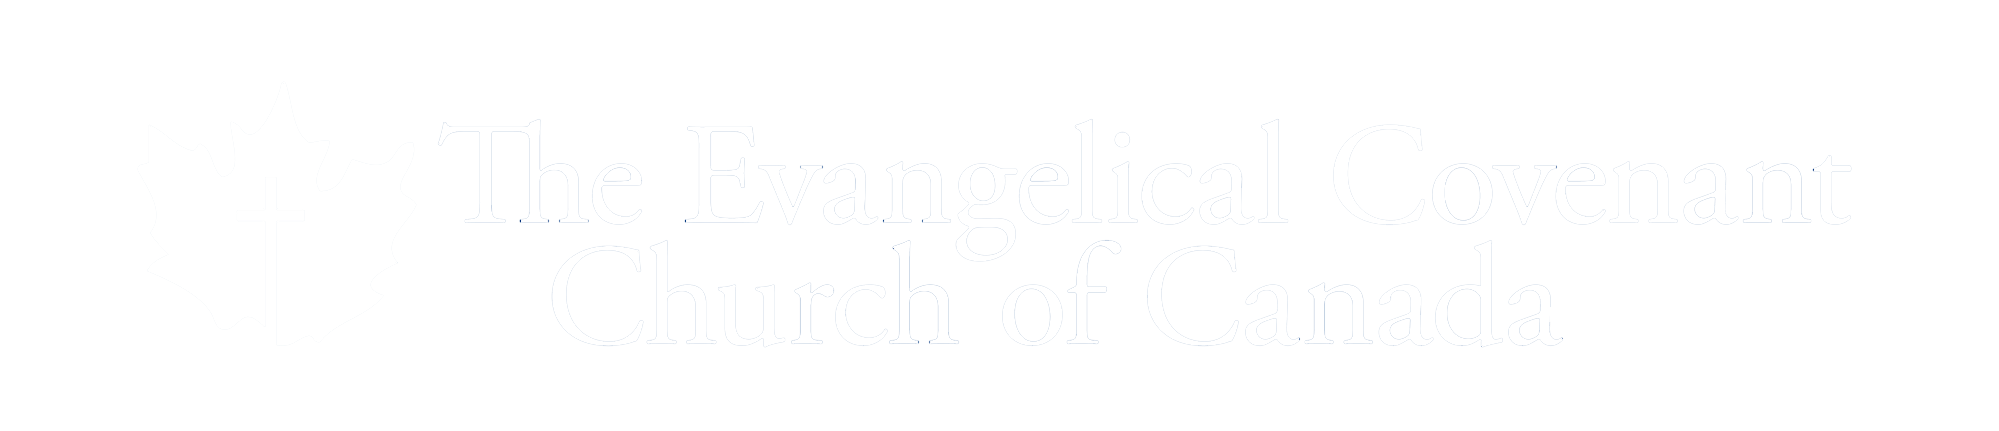 The Evangelical Covenant Church of Canada